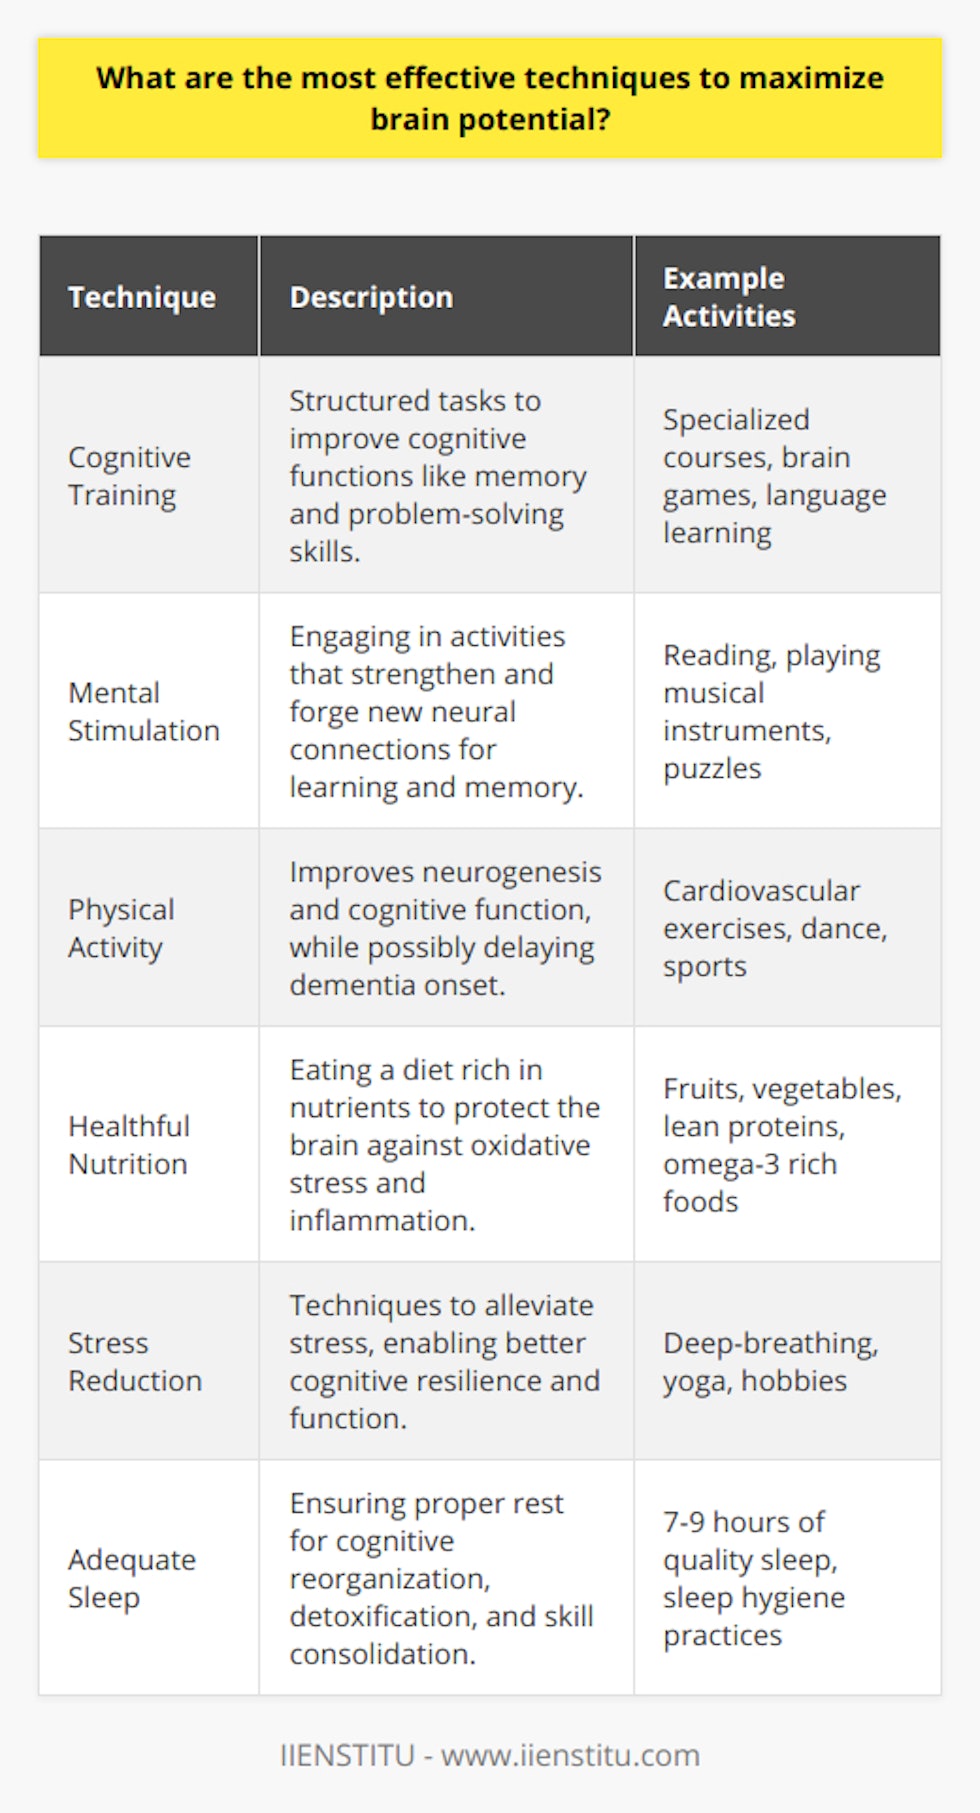 Maximizing brain potential is a multifaceted pursuit that involves several strategies aimed at enhancing cognitive functioning and overall brain health. Incorporating a variety of techniques into one's lifestyle can significantly improve mental capabilities. Here are some effective methods to optimize brain performance:Cognitive Training TechniquesCognitive training involves activities designed to improve specific cognitive functions. These techniques often come in the form of structured tasks or exercises that target memory enhancement, increased focus, and more efficient problem-solving skills. A powerful way to engage in cognitive training is through educational platforms that offer specialized courses, such as IIENSTITU, which provide resources for continuous learning and skill development.Mental StimulationKeeping the brain actively engaged is essential for fostering neuroplasticity. Mental stimulation strengthens existing neural pathways and creates new ones, which are critical for learning and memory. Activities such as reading, playing musical instruments, or exploring areas of interest can all stimulate the brain and contribute to cognitive agility.Physical ActivityPhysical activity is not only beneficial for the body but also for the brain. It promotes neurogenesis, the birth of new neurons, especially in the hippocampus, which is vital for memory and learning. Aerobic exercises, including cardiovascular activities, have been shown to improve cognitive function and even delay the onset of dementia.Healthful NutritionNutrient-rich diets have a profound impact on brain health. Diets that include a variety of fruits, vegetables, lean proteins, and whole grains provide antioxidants and other nutrients that protect the brain from oxidative stress and inflammation. Omega-3 fatty acids, found in fish, flaxseeds, and walnuts, are particularly important for maintaining the integrity of brain cell membranes.Stress Reduction TechniquesExcessive stress can impair cognitive function and contribute to mental health issues. Implementing stress reduction techniques, such as deep-breathing exercises, yoga, or even engaging in hobbies, can alleviate stress and improve cognitive resilience. Regular practice of these activities can lead to a calmer mind, allowing for better focus and concentration.Adequate SleepSleep is critical for cognitive processes. During sleep, the brain reorganizes and recharges itself, removing toxins that accumulate during wakeful hours. Quality sleep boosts learning, memory consolidation, and problem-solving abilities. Adults should aim for 7-9 hours of uninterrupted sleep each night to support optimal brain function.By integrating these techniques into daily routines, individuals can harness their brain's full potential. Embracing lifelong learning, maintaining physical health, eating a balanced diet, reducing stress, and ensuring proper sleep are all key to cognitive enhancement. When combined, these methods can lead to significant improvements in brain function, equipping individuals with the skills necessary for success in all walks of life.